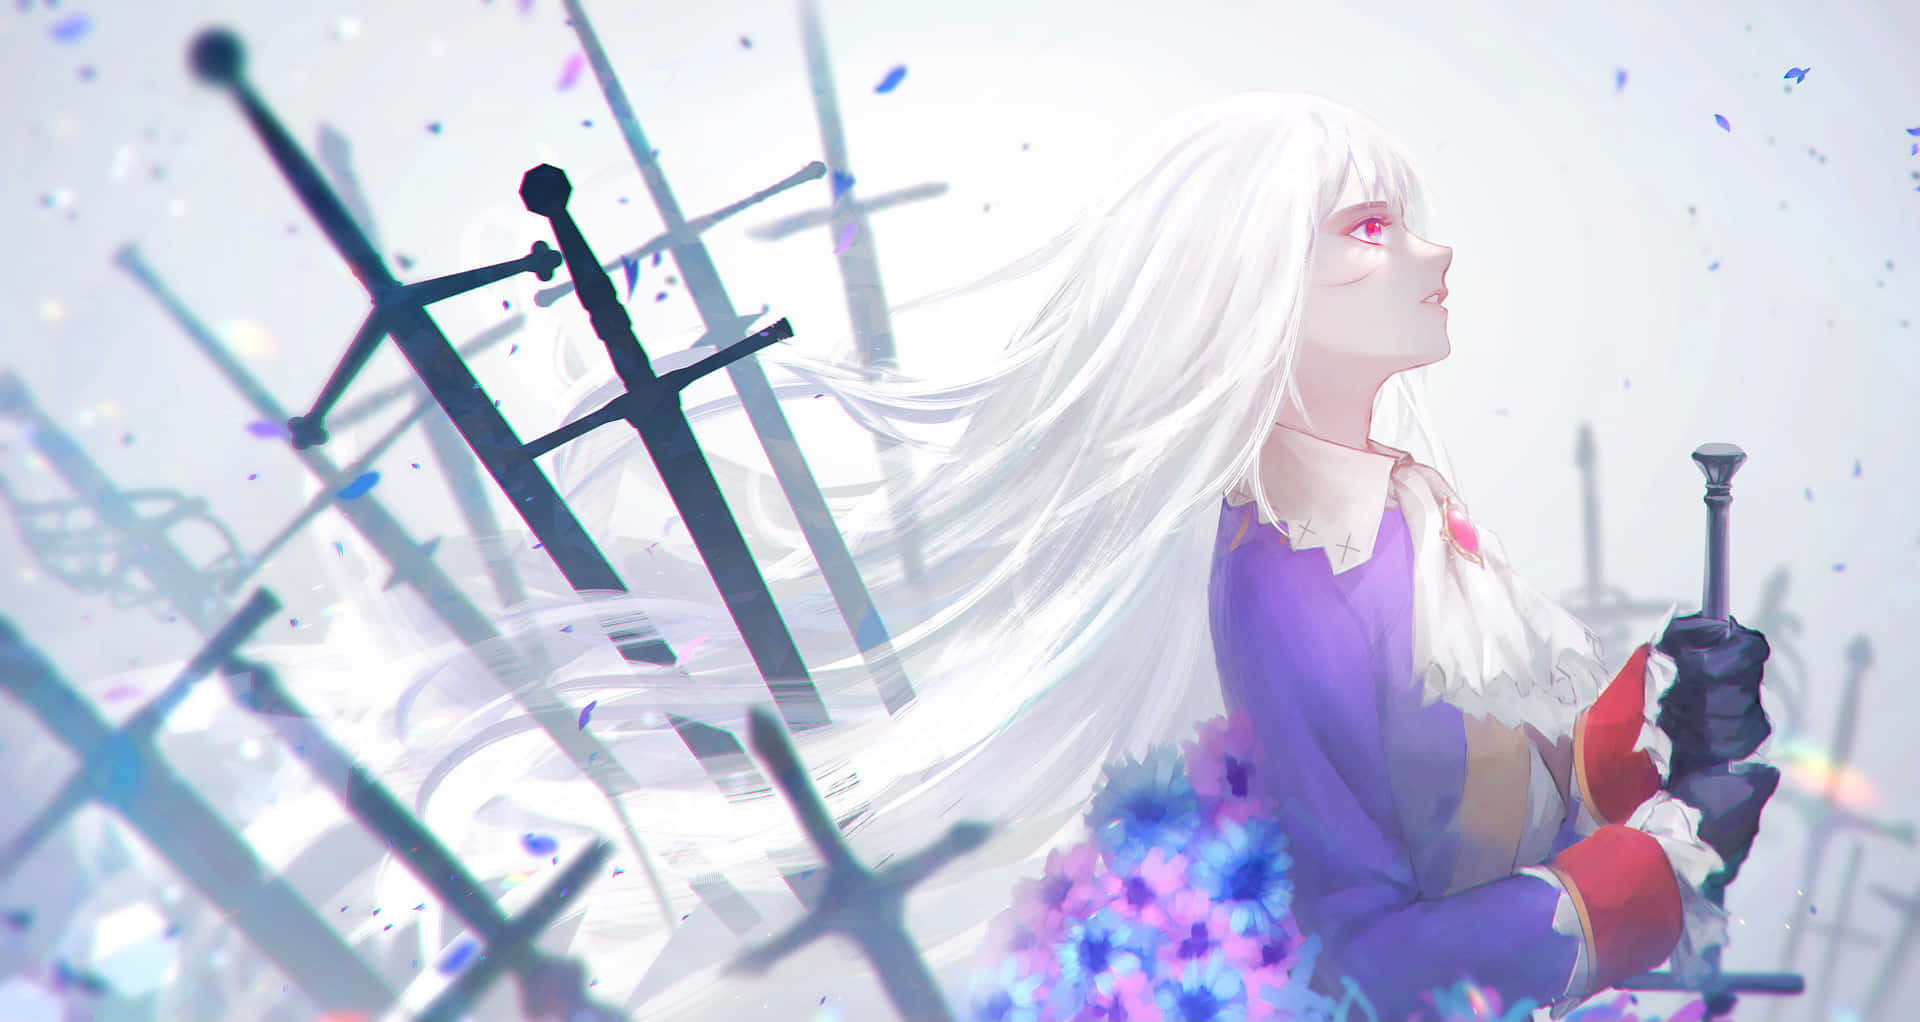 a girl with long white hair is holding swords Wallpaper